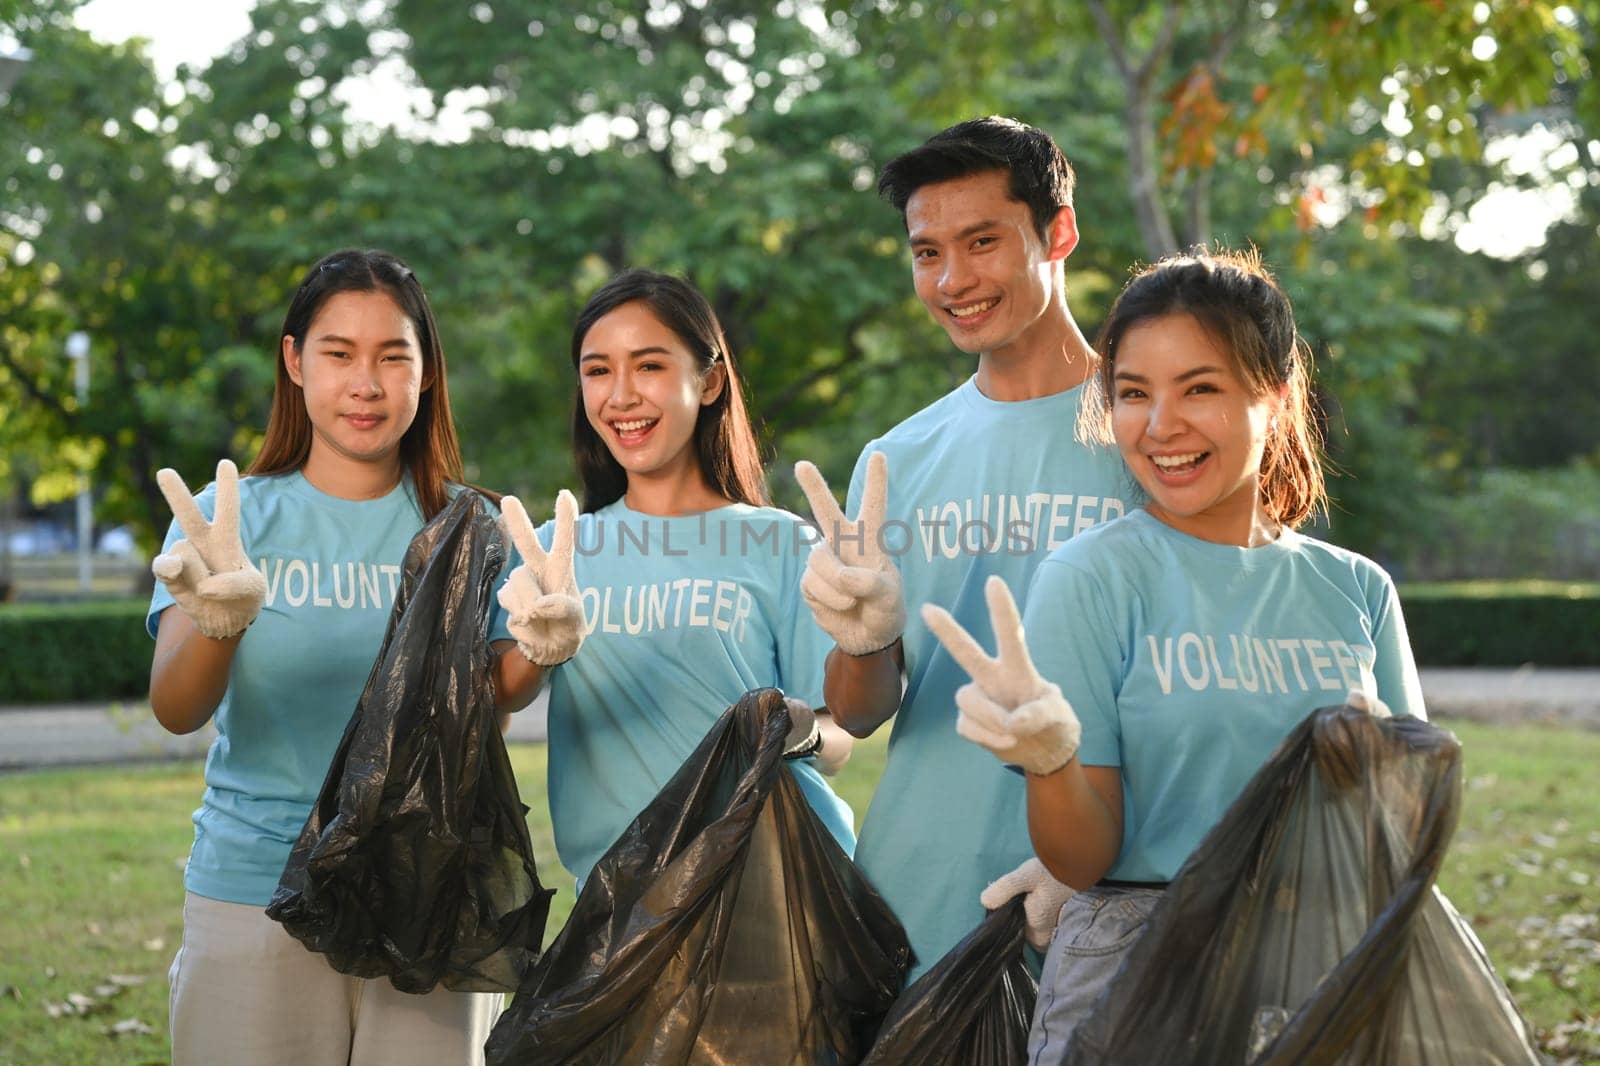 Group of young volunteer collecting trash in the park. Environmental protection and charity concept by prathanchorruangsak